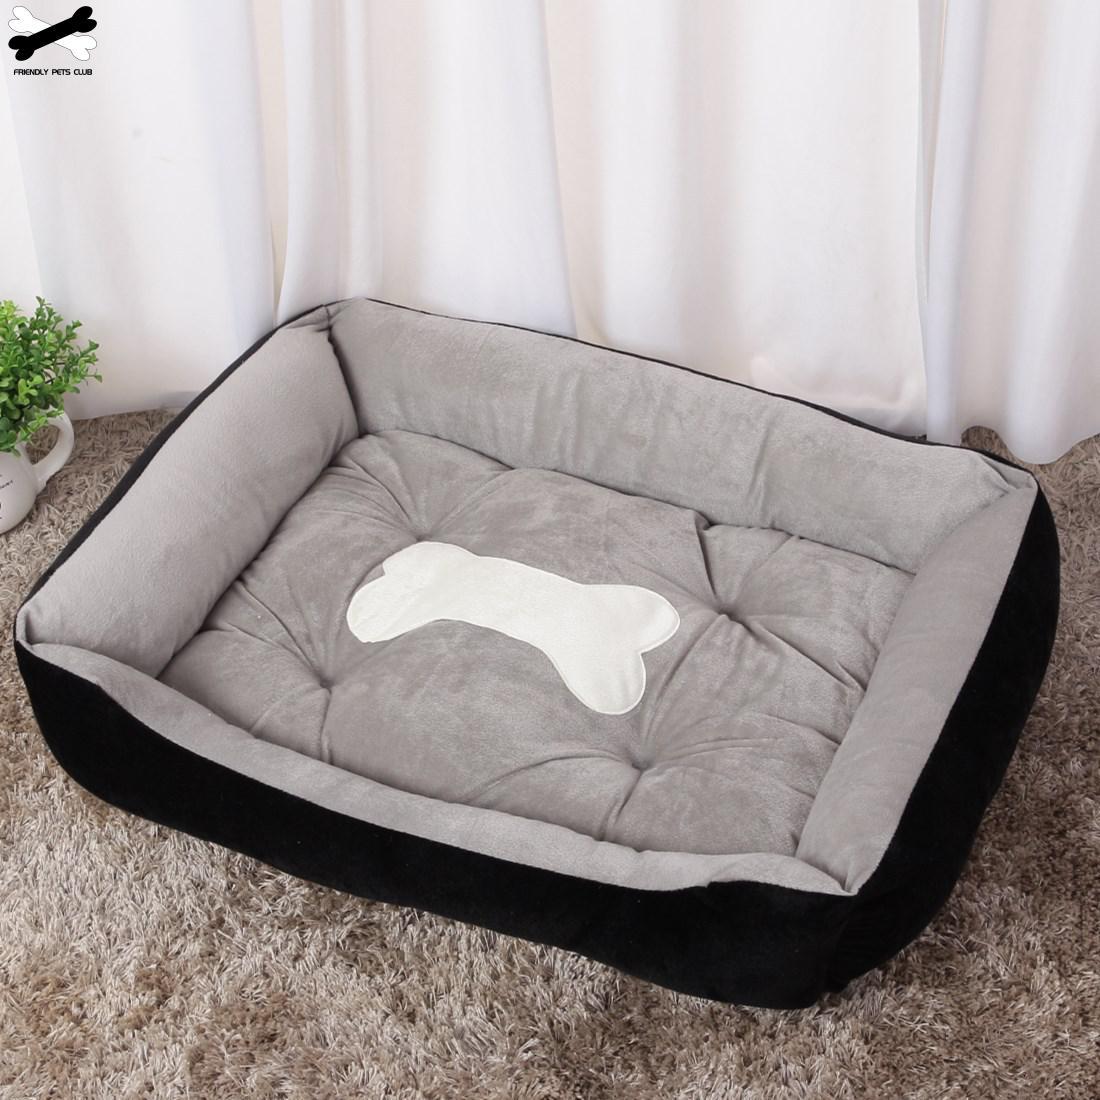 Bone Pet Bed Warm Pet Bed Linen For Small Medium Large Dog Soft Pet Bed For Dogs Washable House For Cat Puppy Cotton Kennel Wash